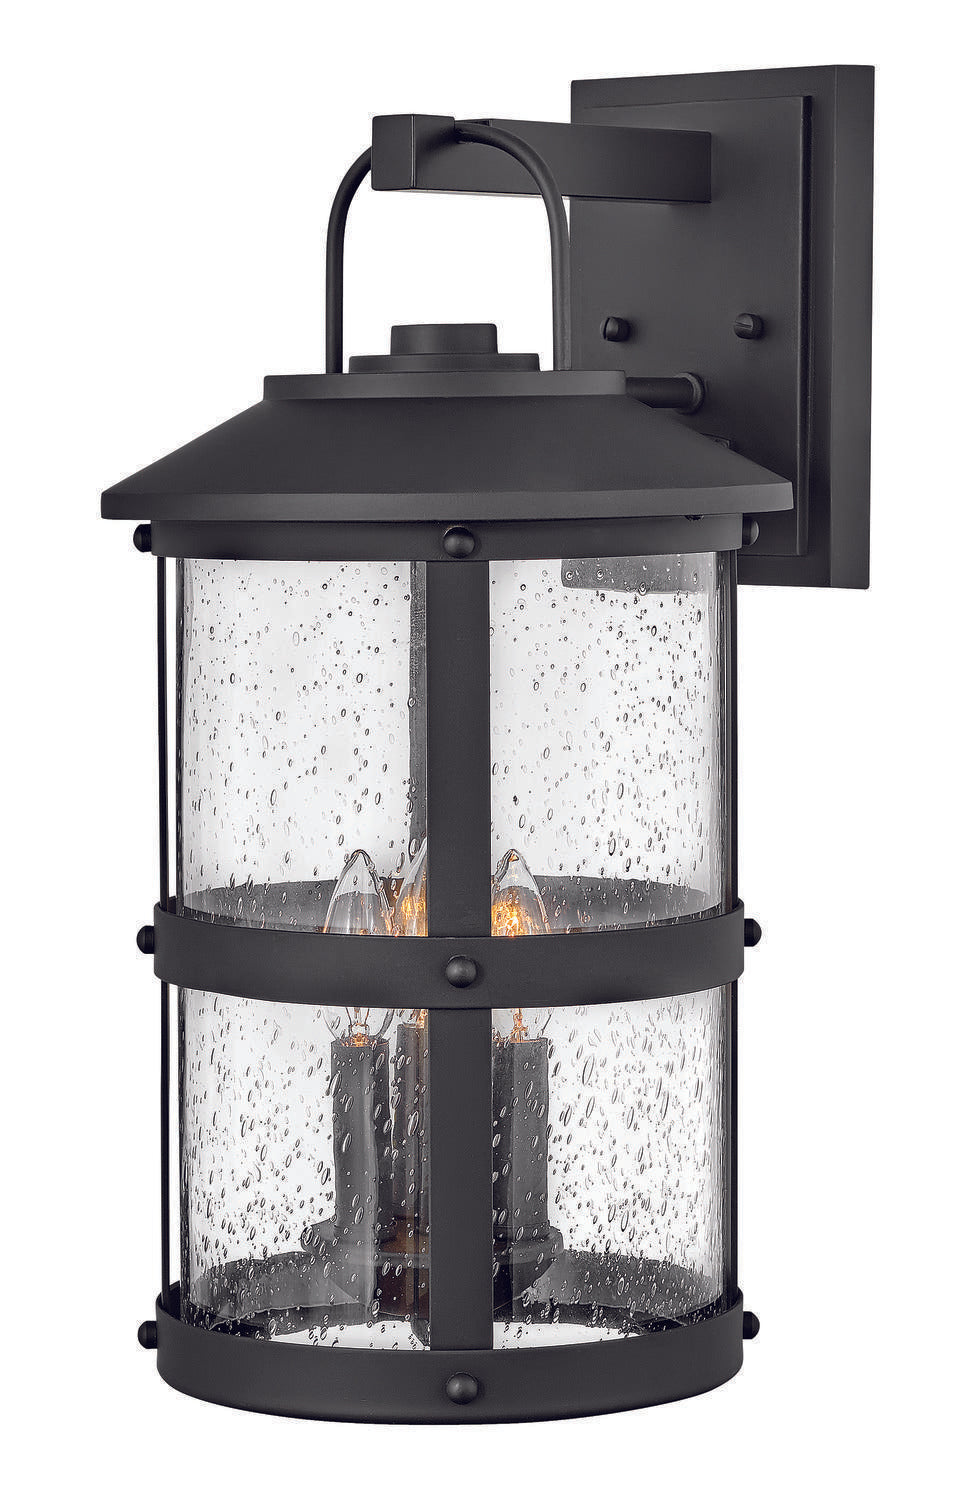 Hinkley OUTDOOR LAKEHOUSE Large Wall Mount Lantern 2685 Outdoor l Wall Hinkley Black  